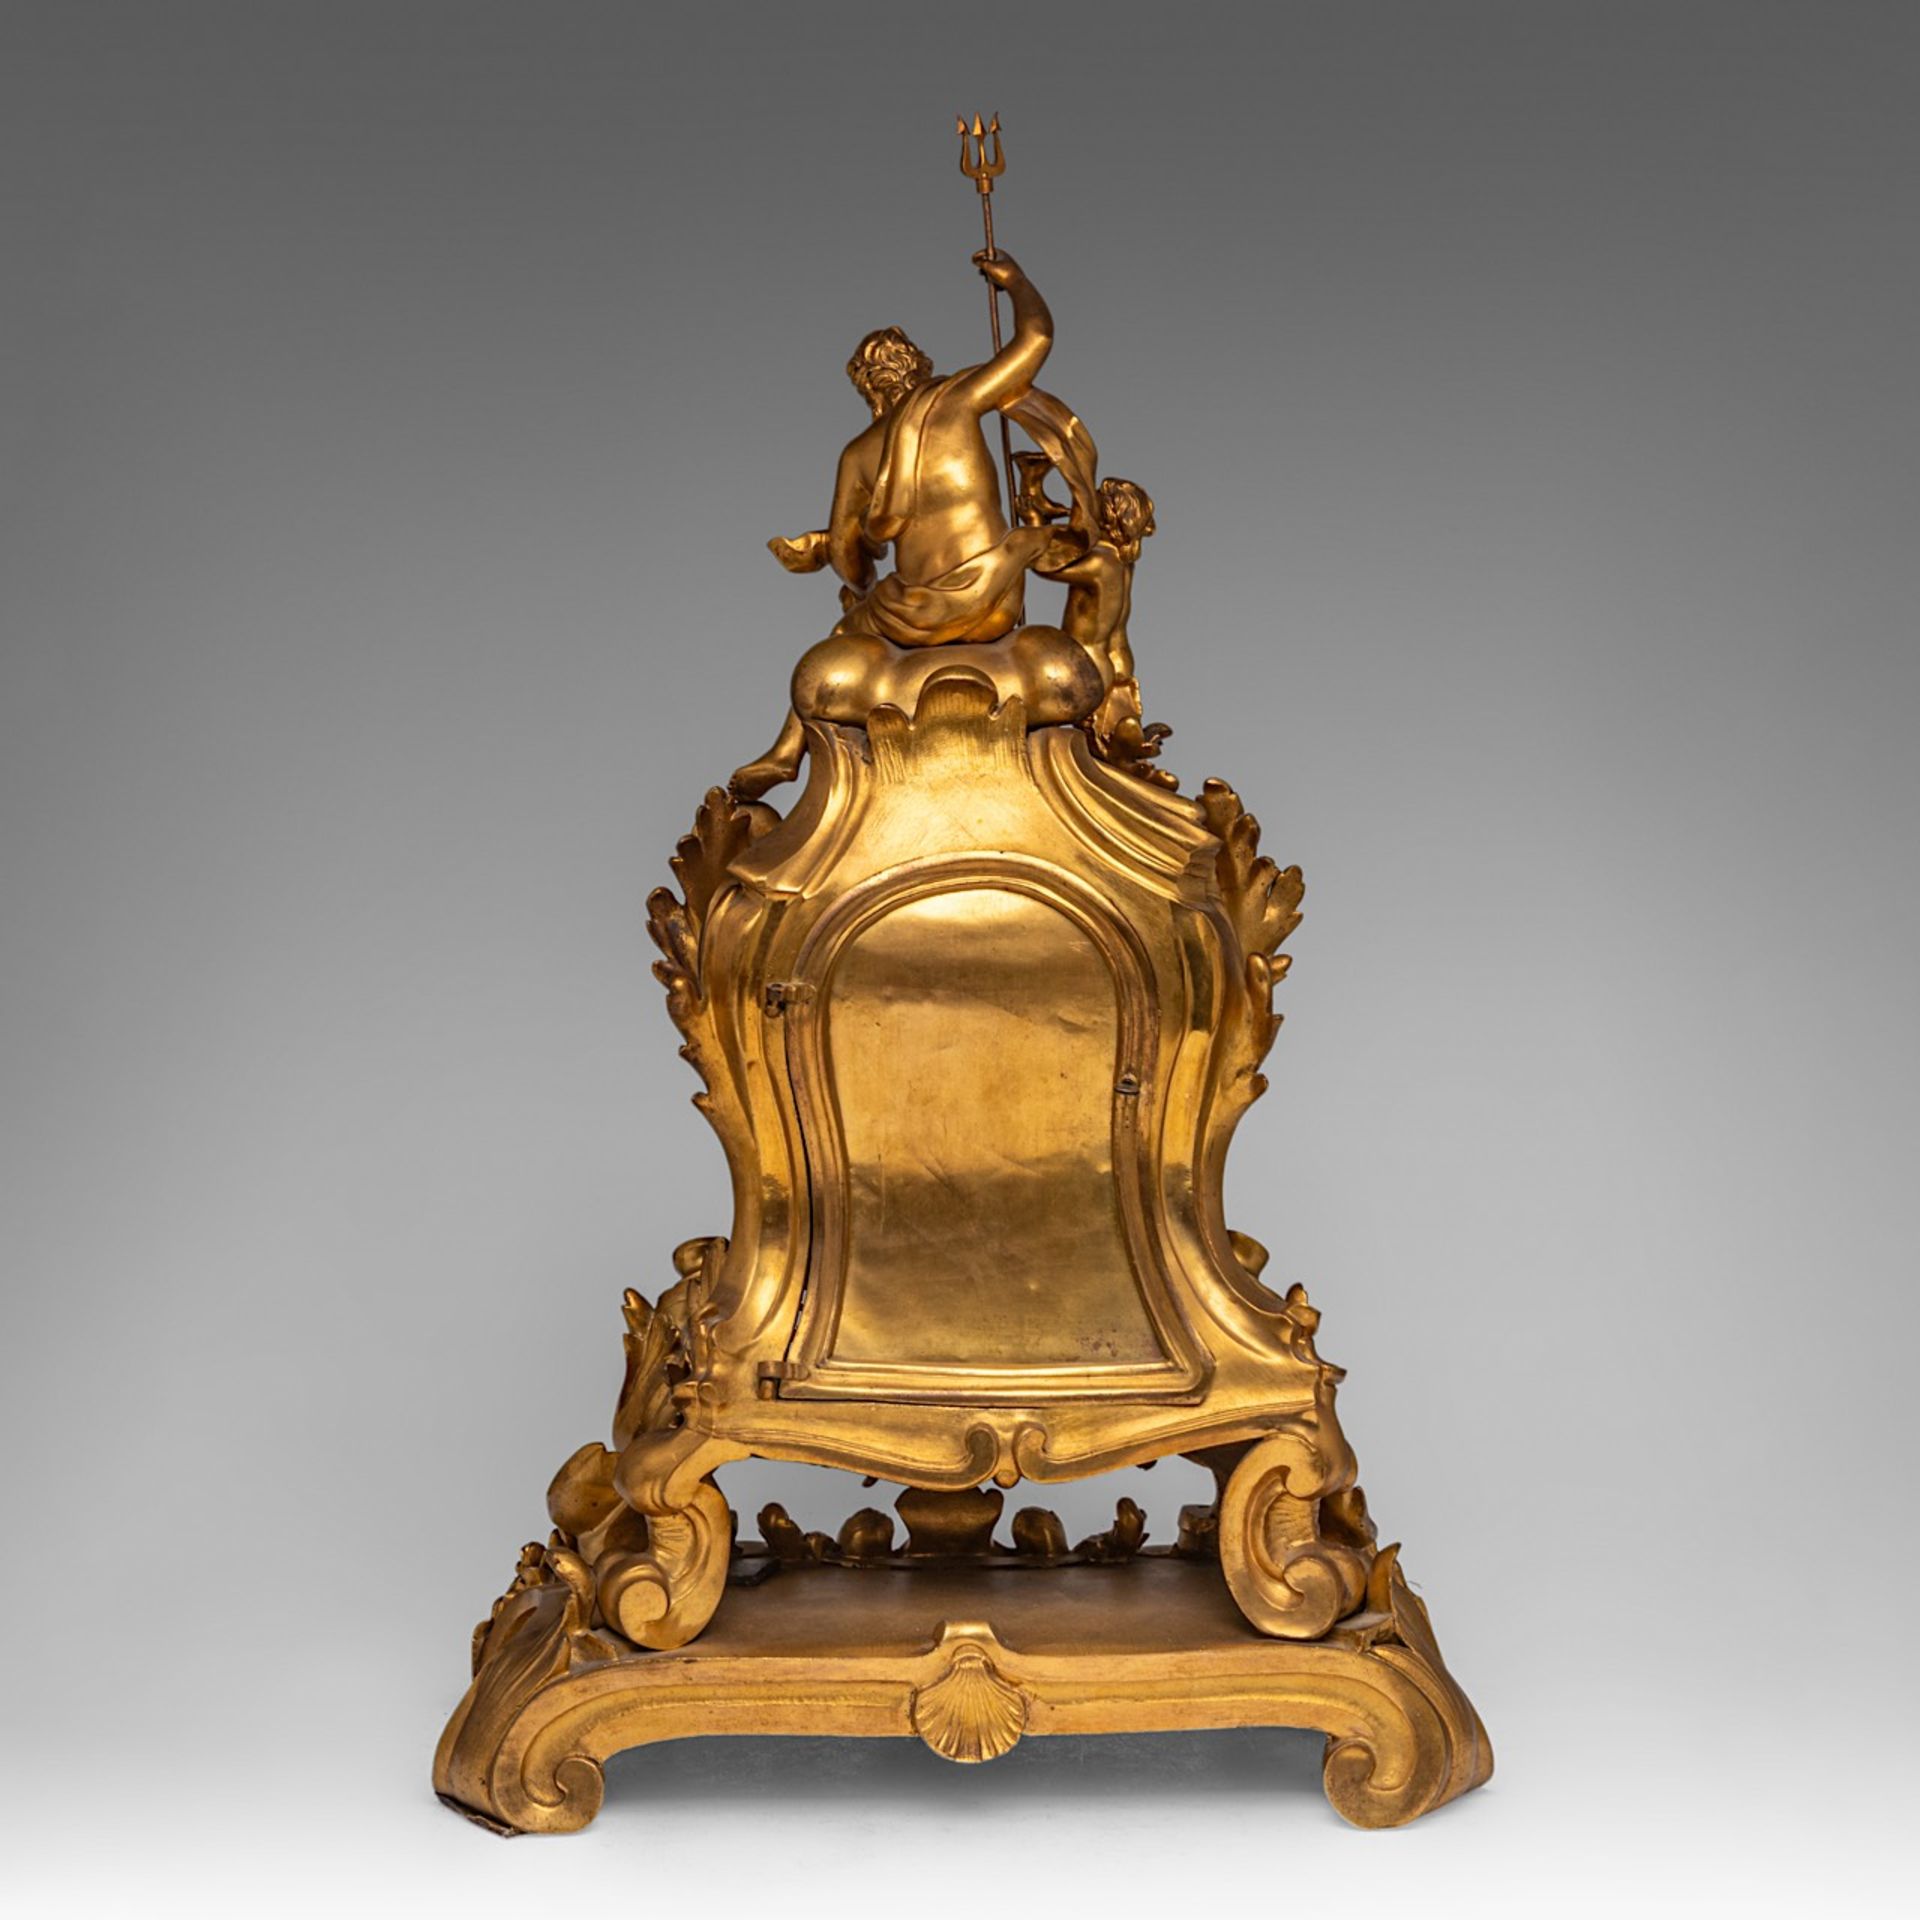 A Rococo Revival gilt bronze mantle clock, decorated with Neptune, Ferdinand Berthoud, H 71 cm - Image 6 of 9